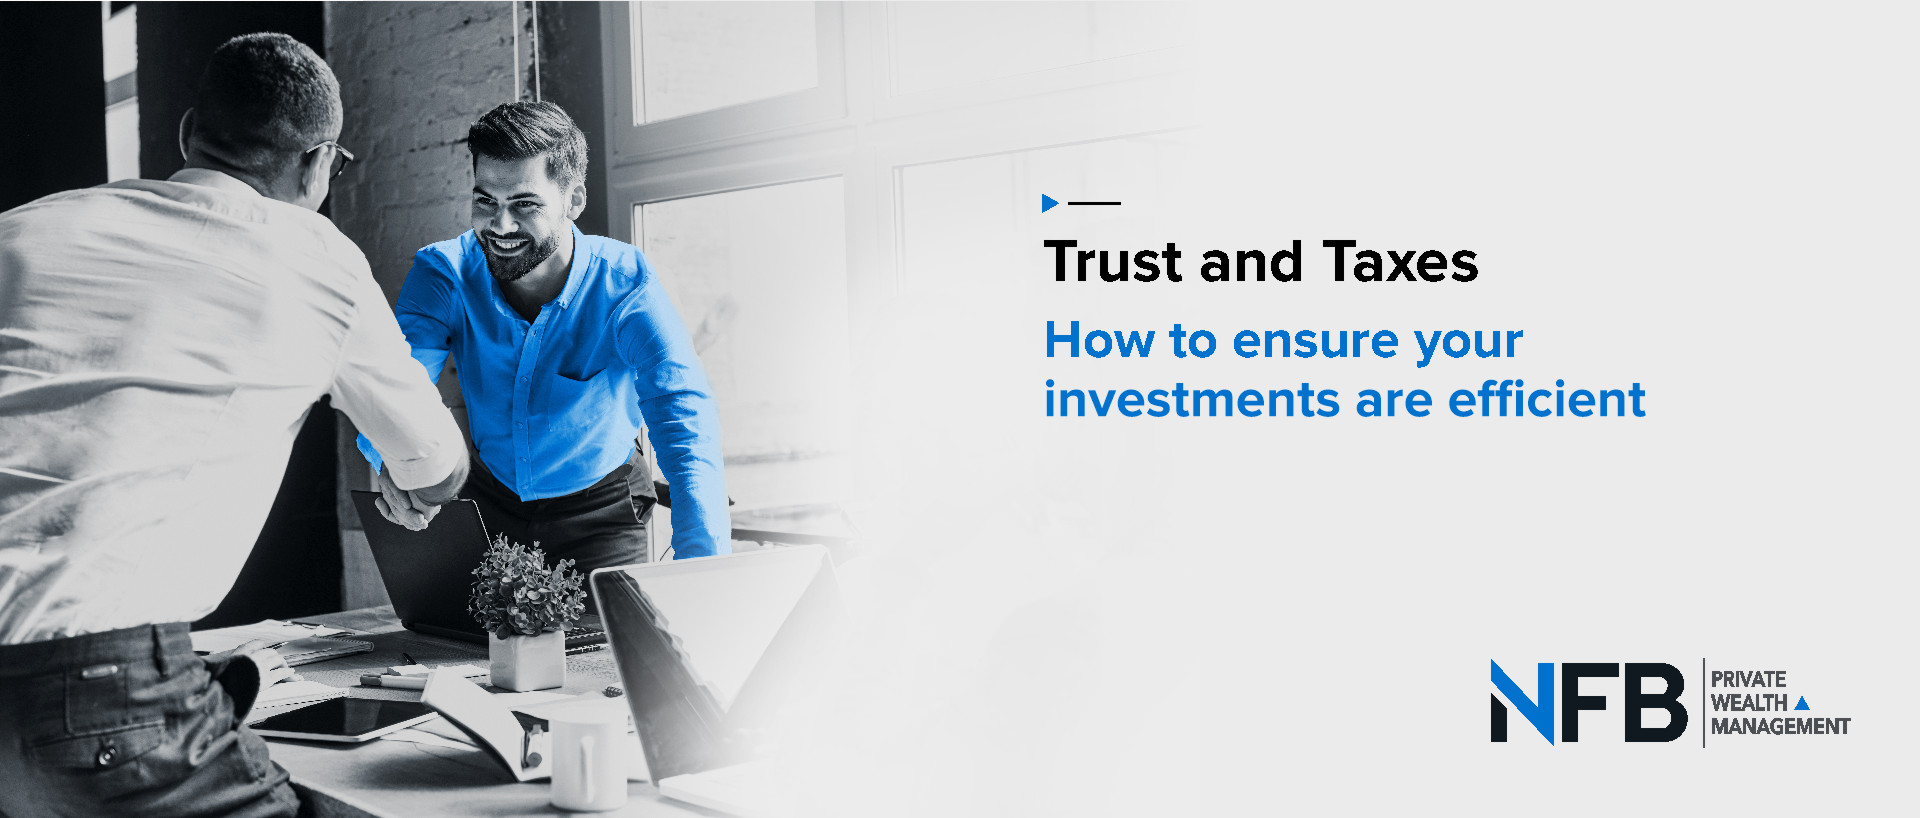 Trusts and Taxes - How to Ensure Your Investments are Efficient